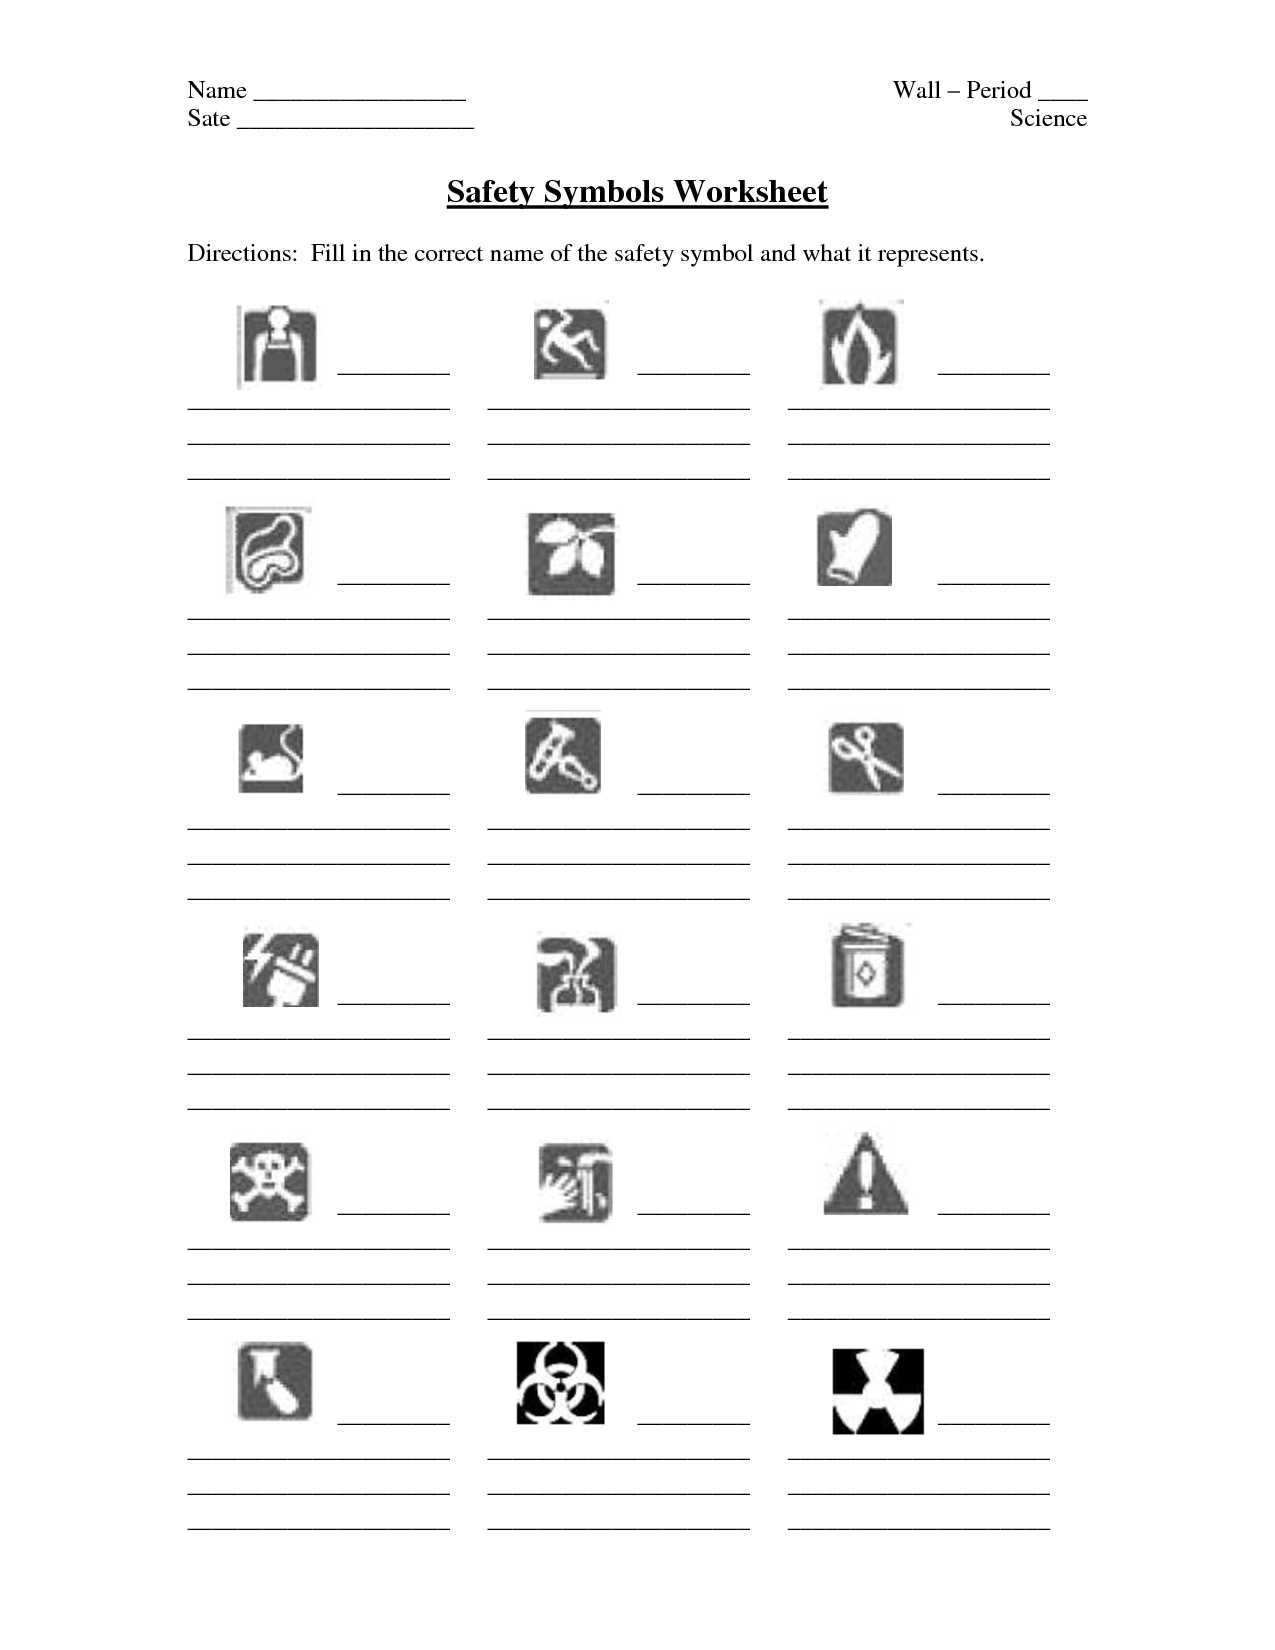 Scientific Inquiry Worksheet Answers with Science Safety Symbols Worksheet